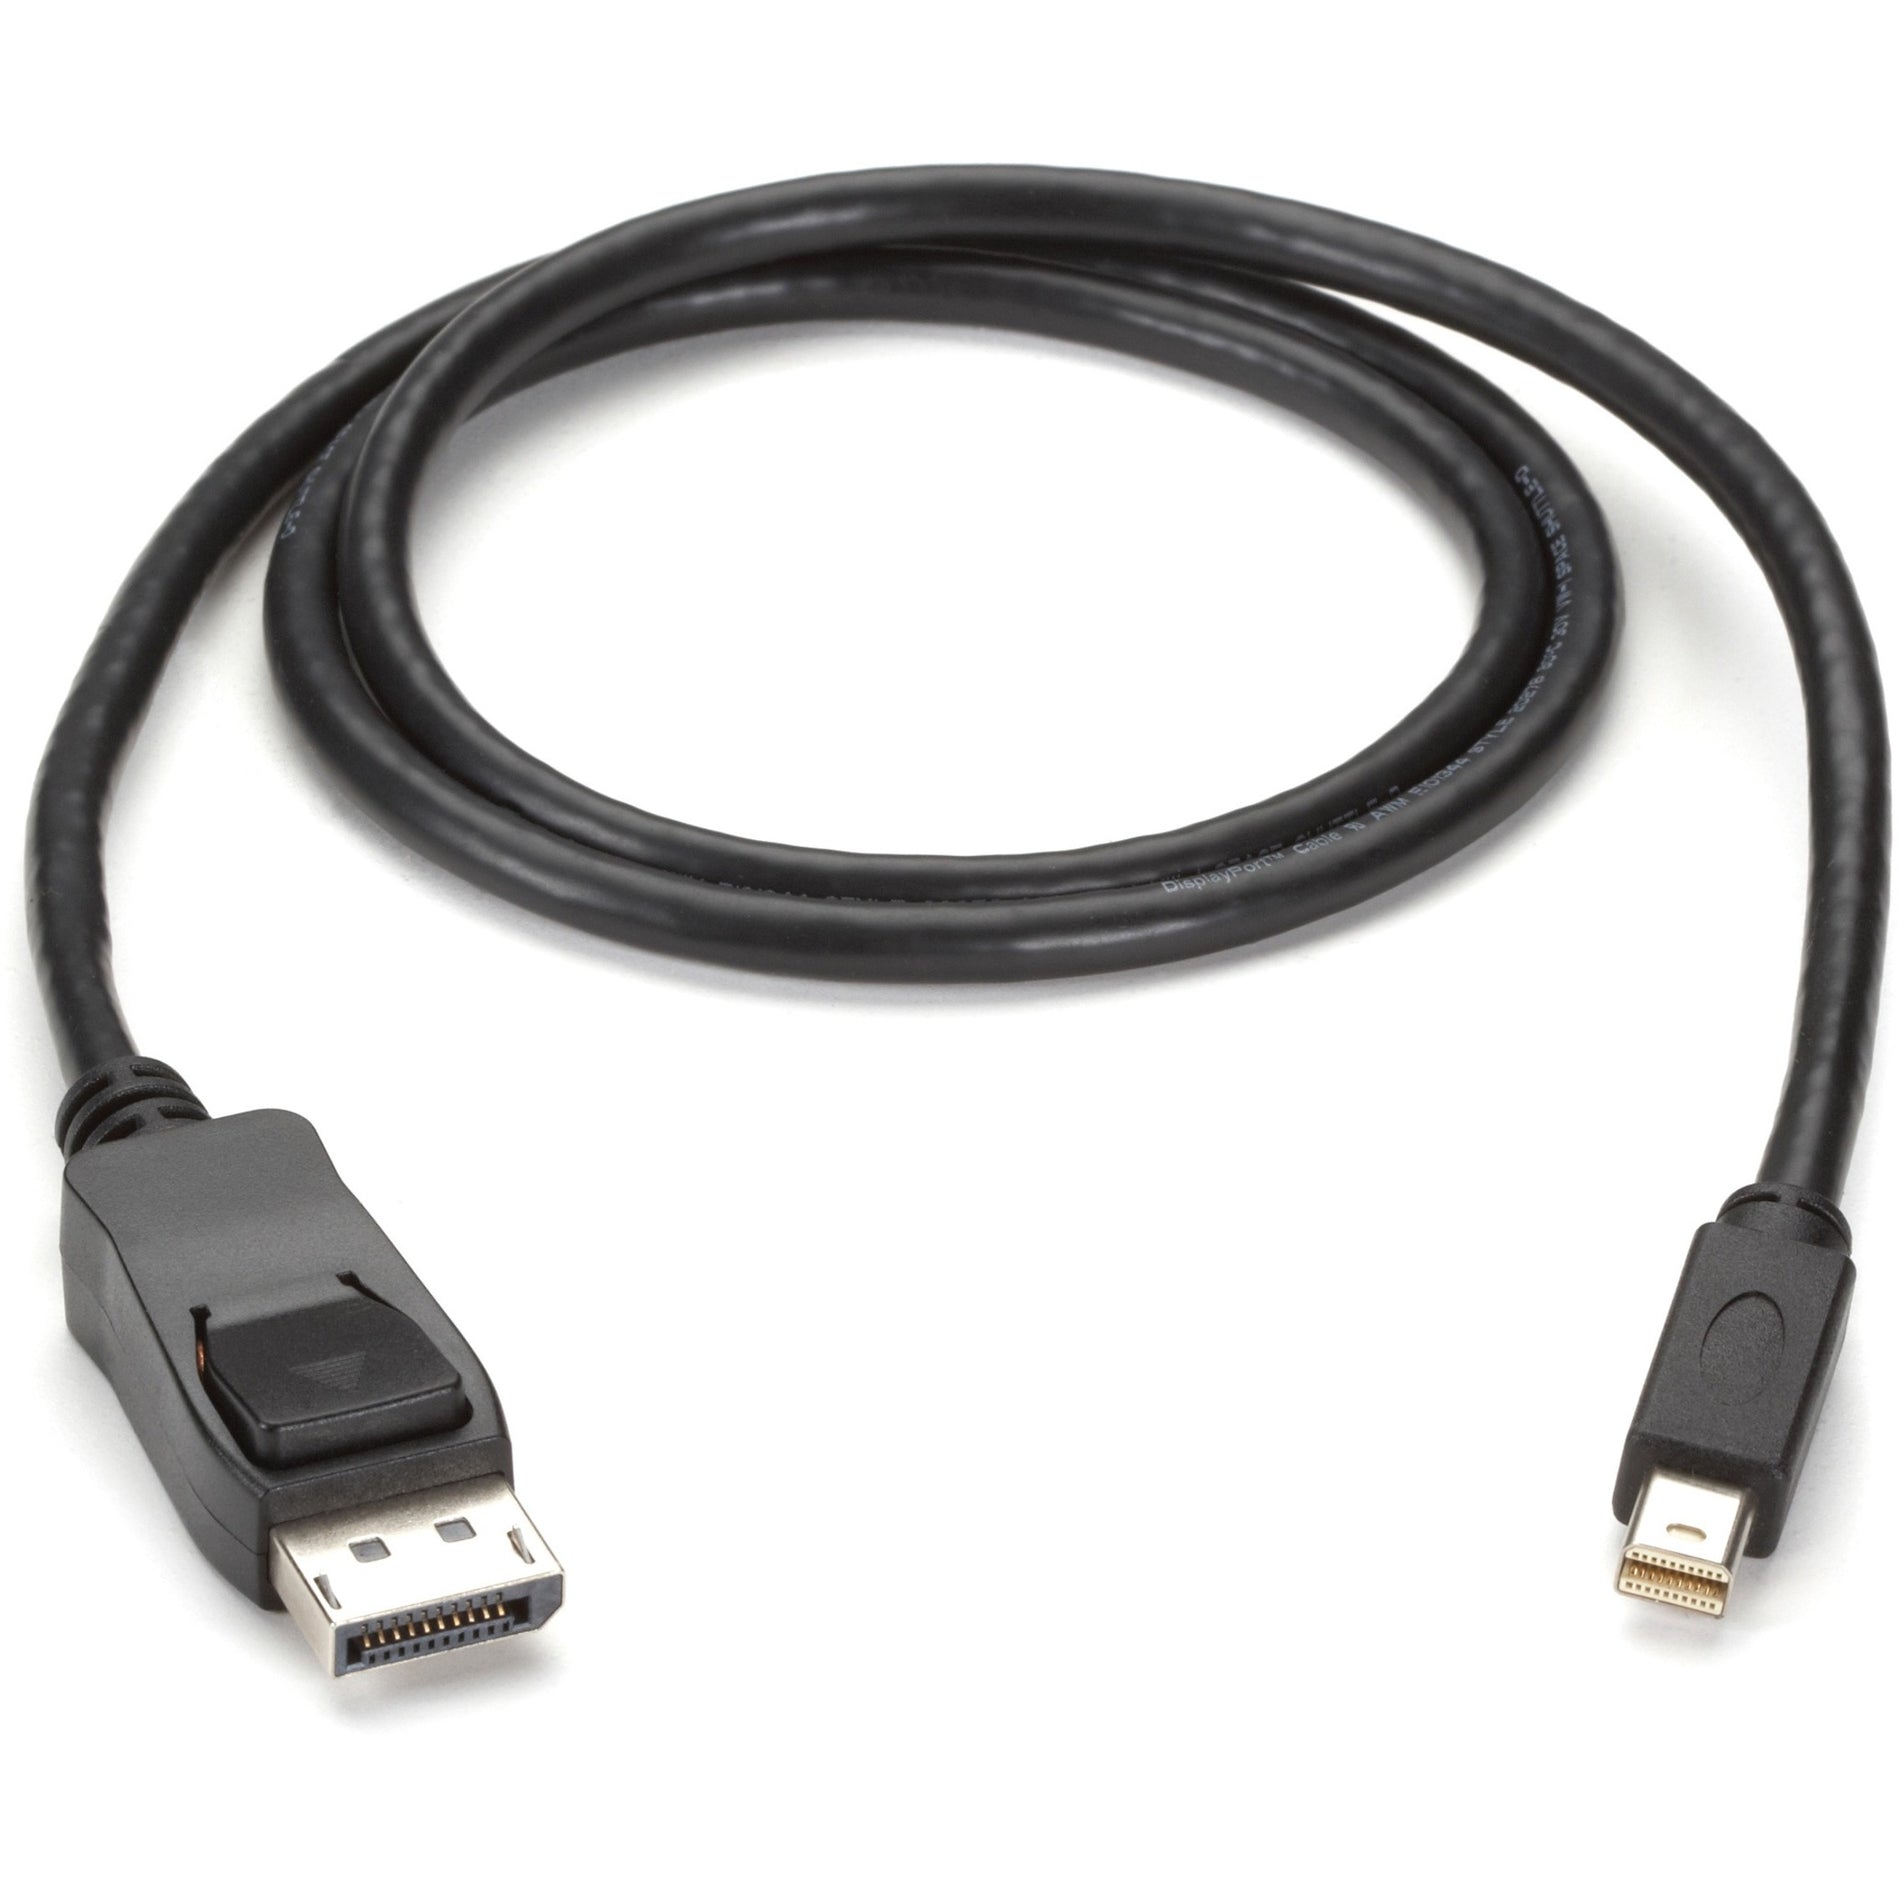 Black Box ENVMDPDP-0010-MM Mini DisplayPort to DisplayPort Cable 10-ft. (3.0-m) Copper Conductor Gold Plating 5.4 Gbit/s Data Transfer Rate